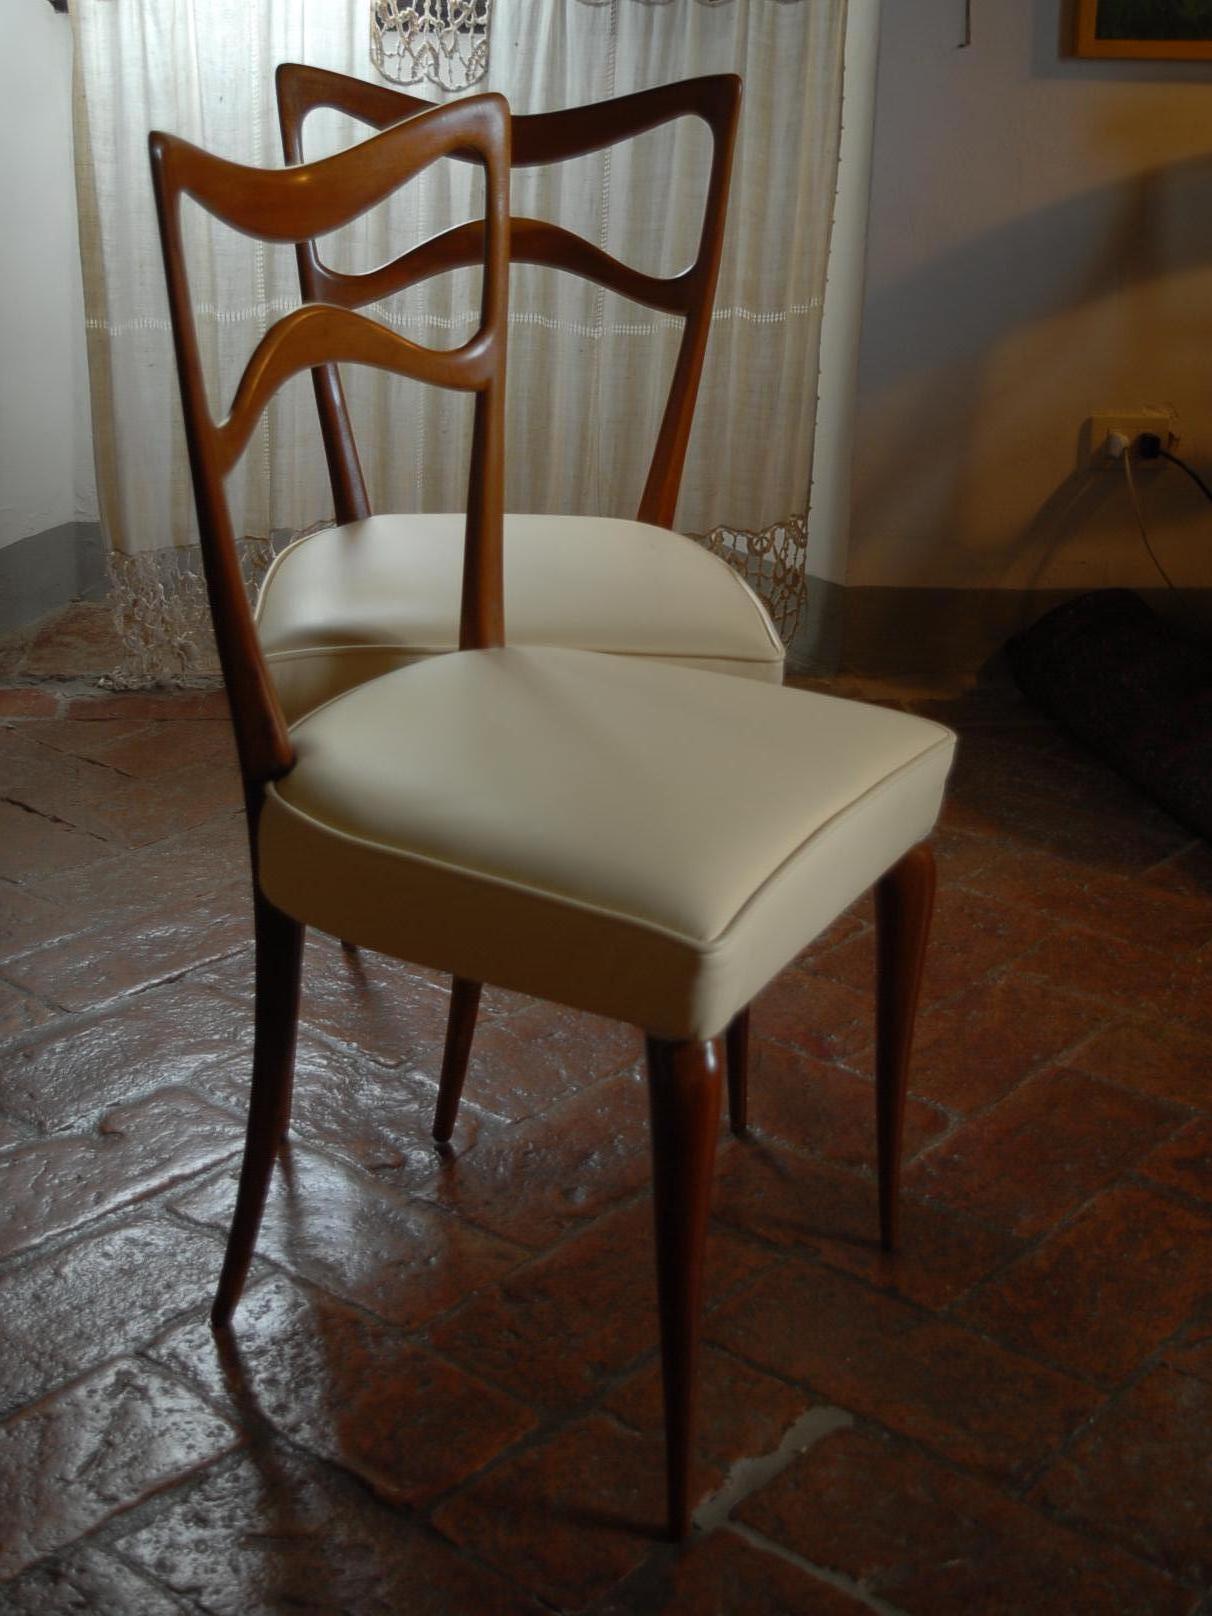 20th Century Guglielmo Ulrich Six Sculptural Dining Chairs, Mahogany and Italian leather 40s